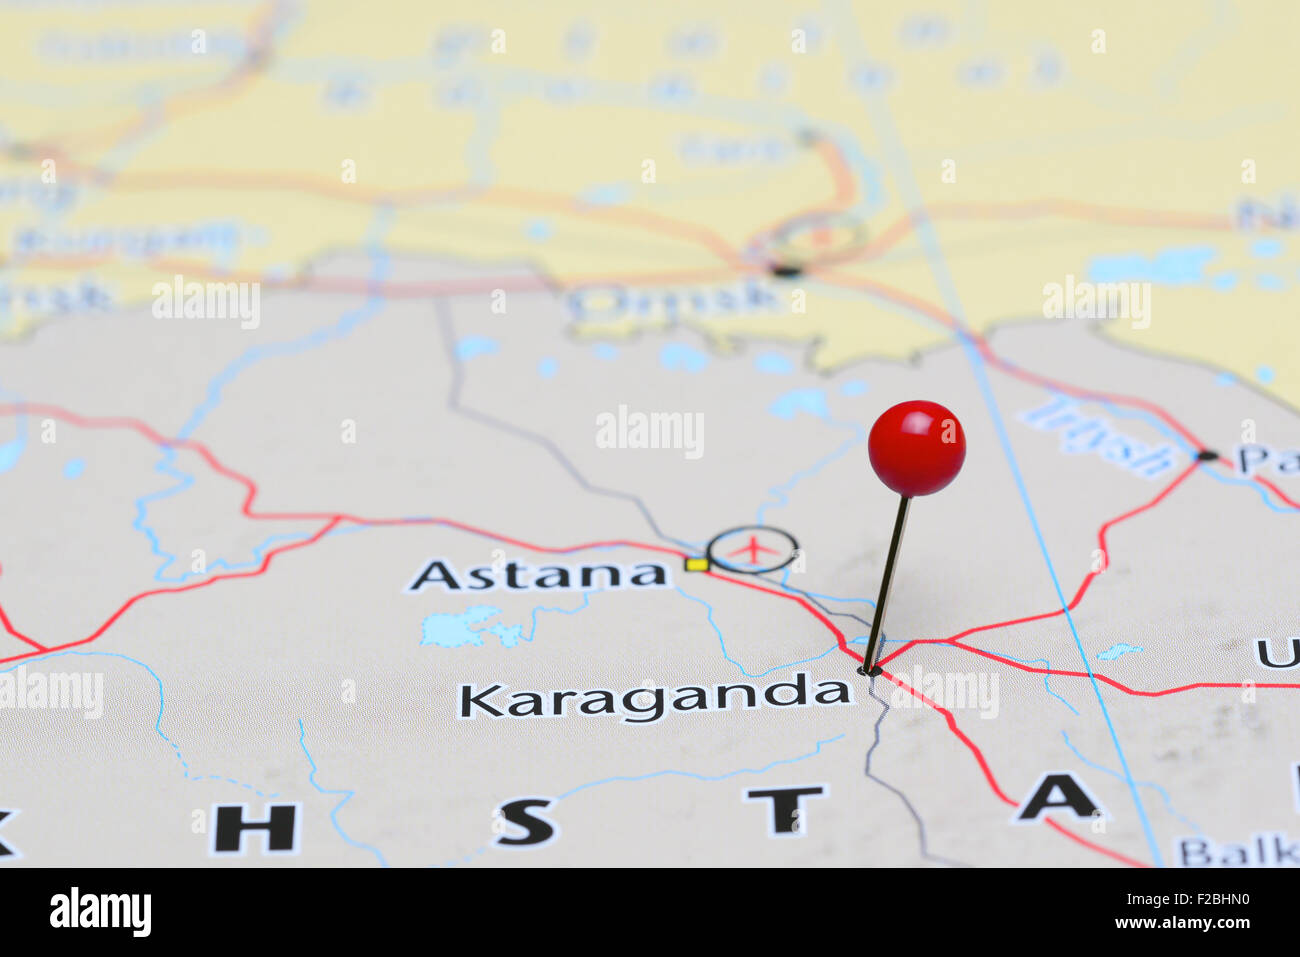 Karaganda pinned on a map of Asia Stock Photo